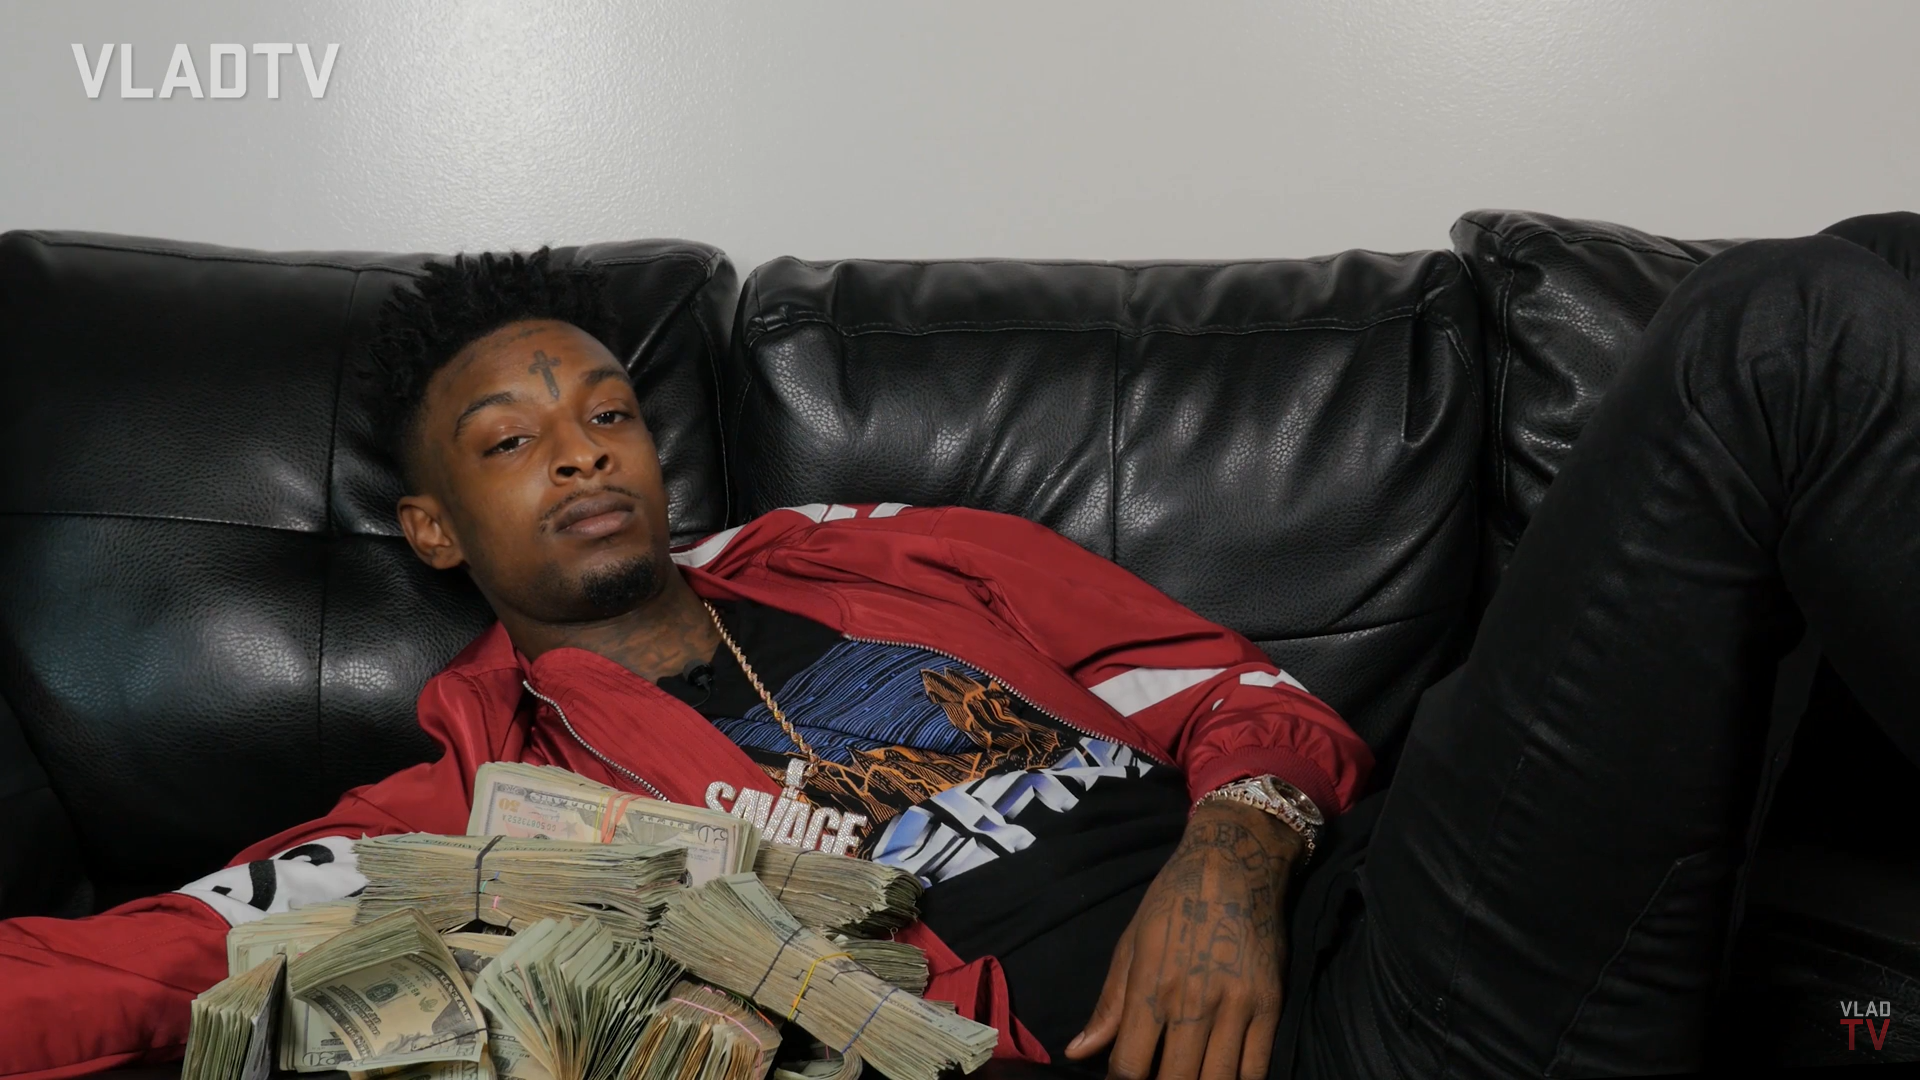 21 Savage Announces Issa Tour With Young M.A., Tee Grizzley, and Young Nudy